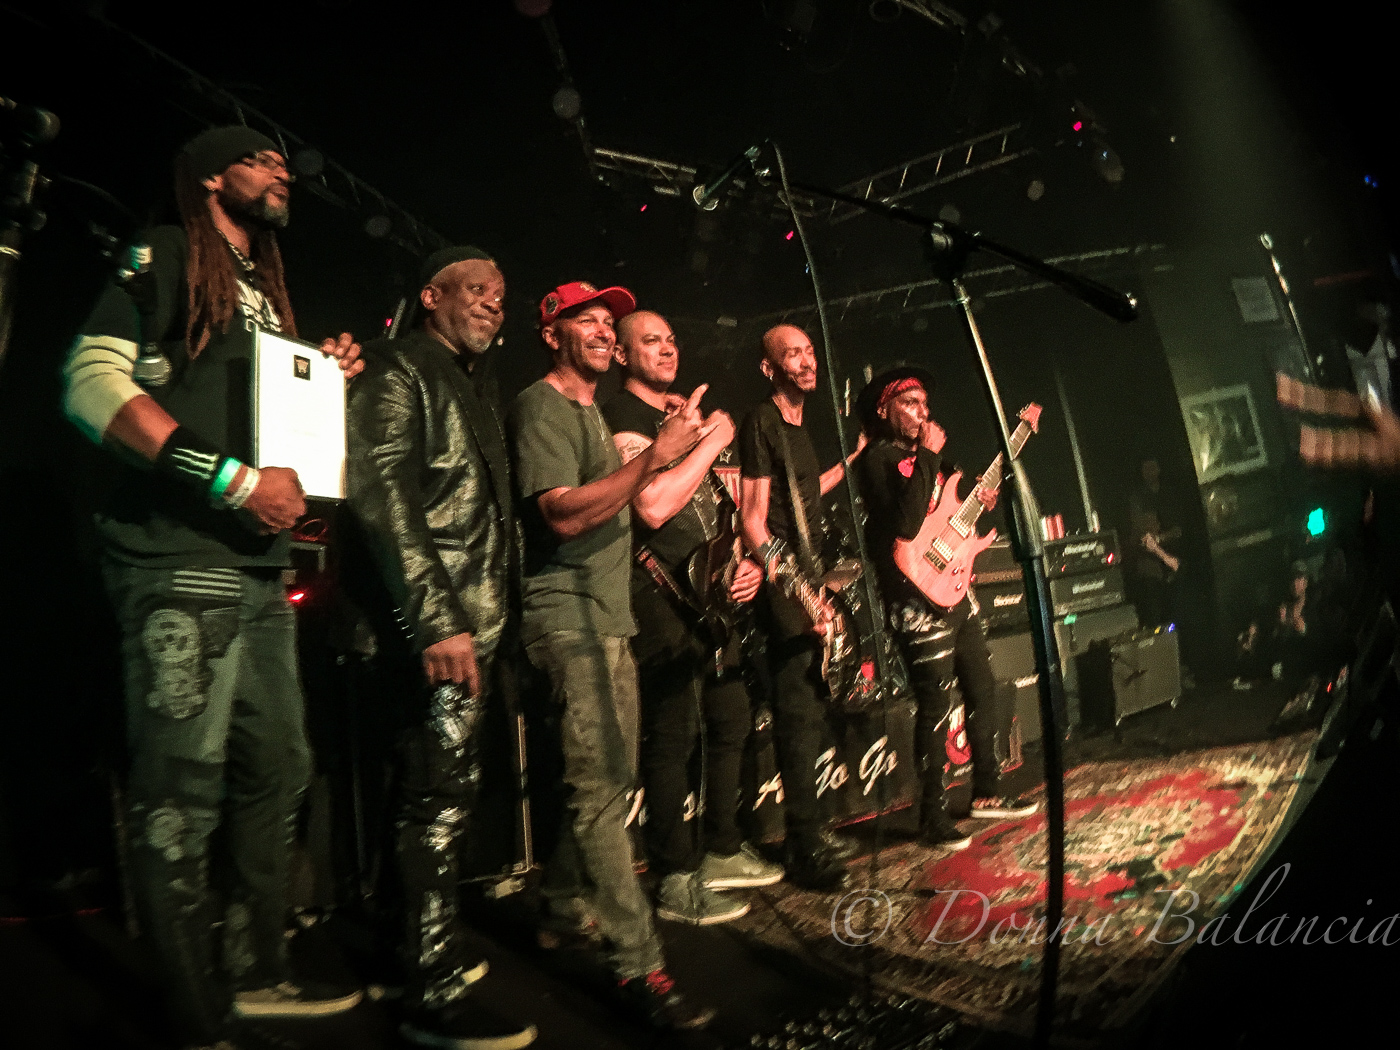 Tom Morello and pals like Corey Glover, DJ Will, and Dug Pinnick celebrate the return of Sound Barrier - Photo © 2017 Donna Balancia